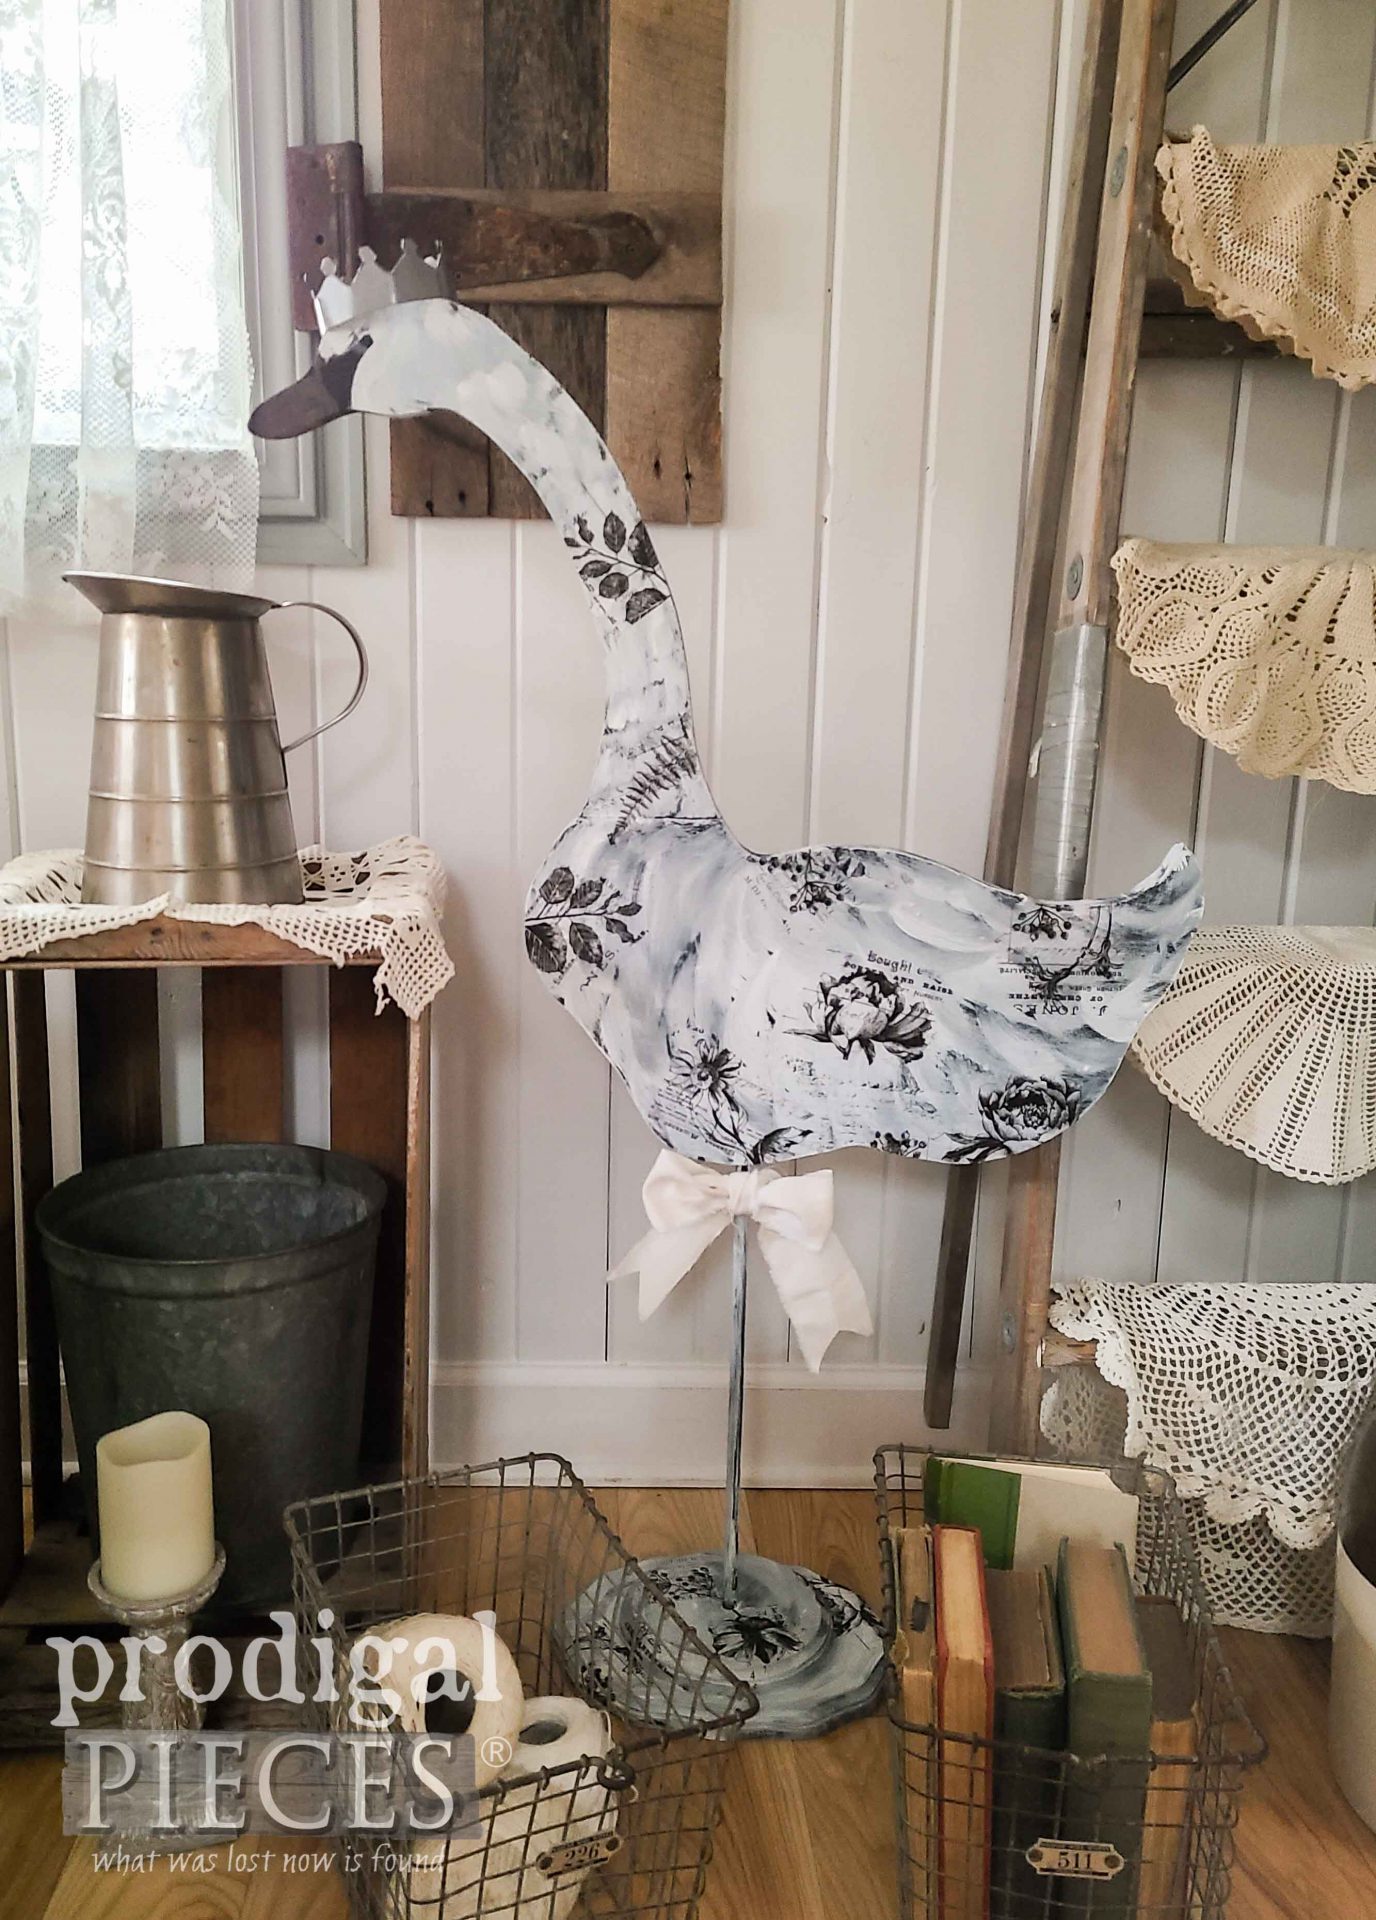 Farmhouse Chic Swan with Shabby Chic Style by Larissa of Prodigal Pieces | prodigalpieces.com #prodigalpieces #farmhouse #shabbychic #home #homedecor